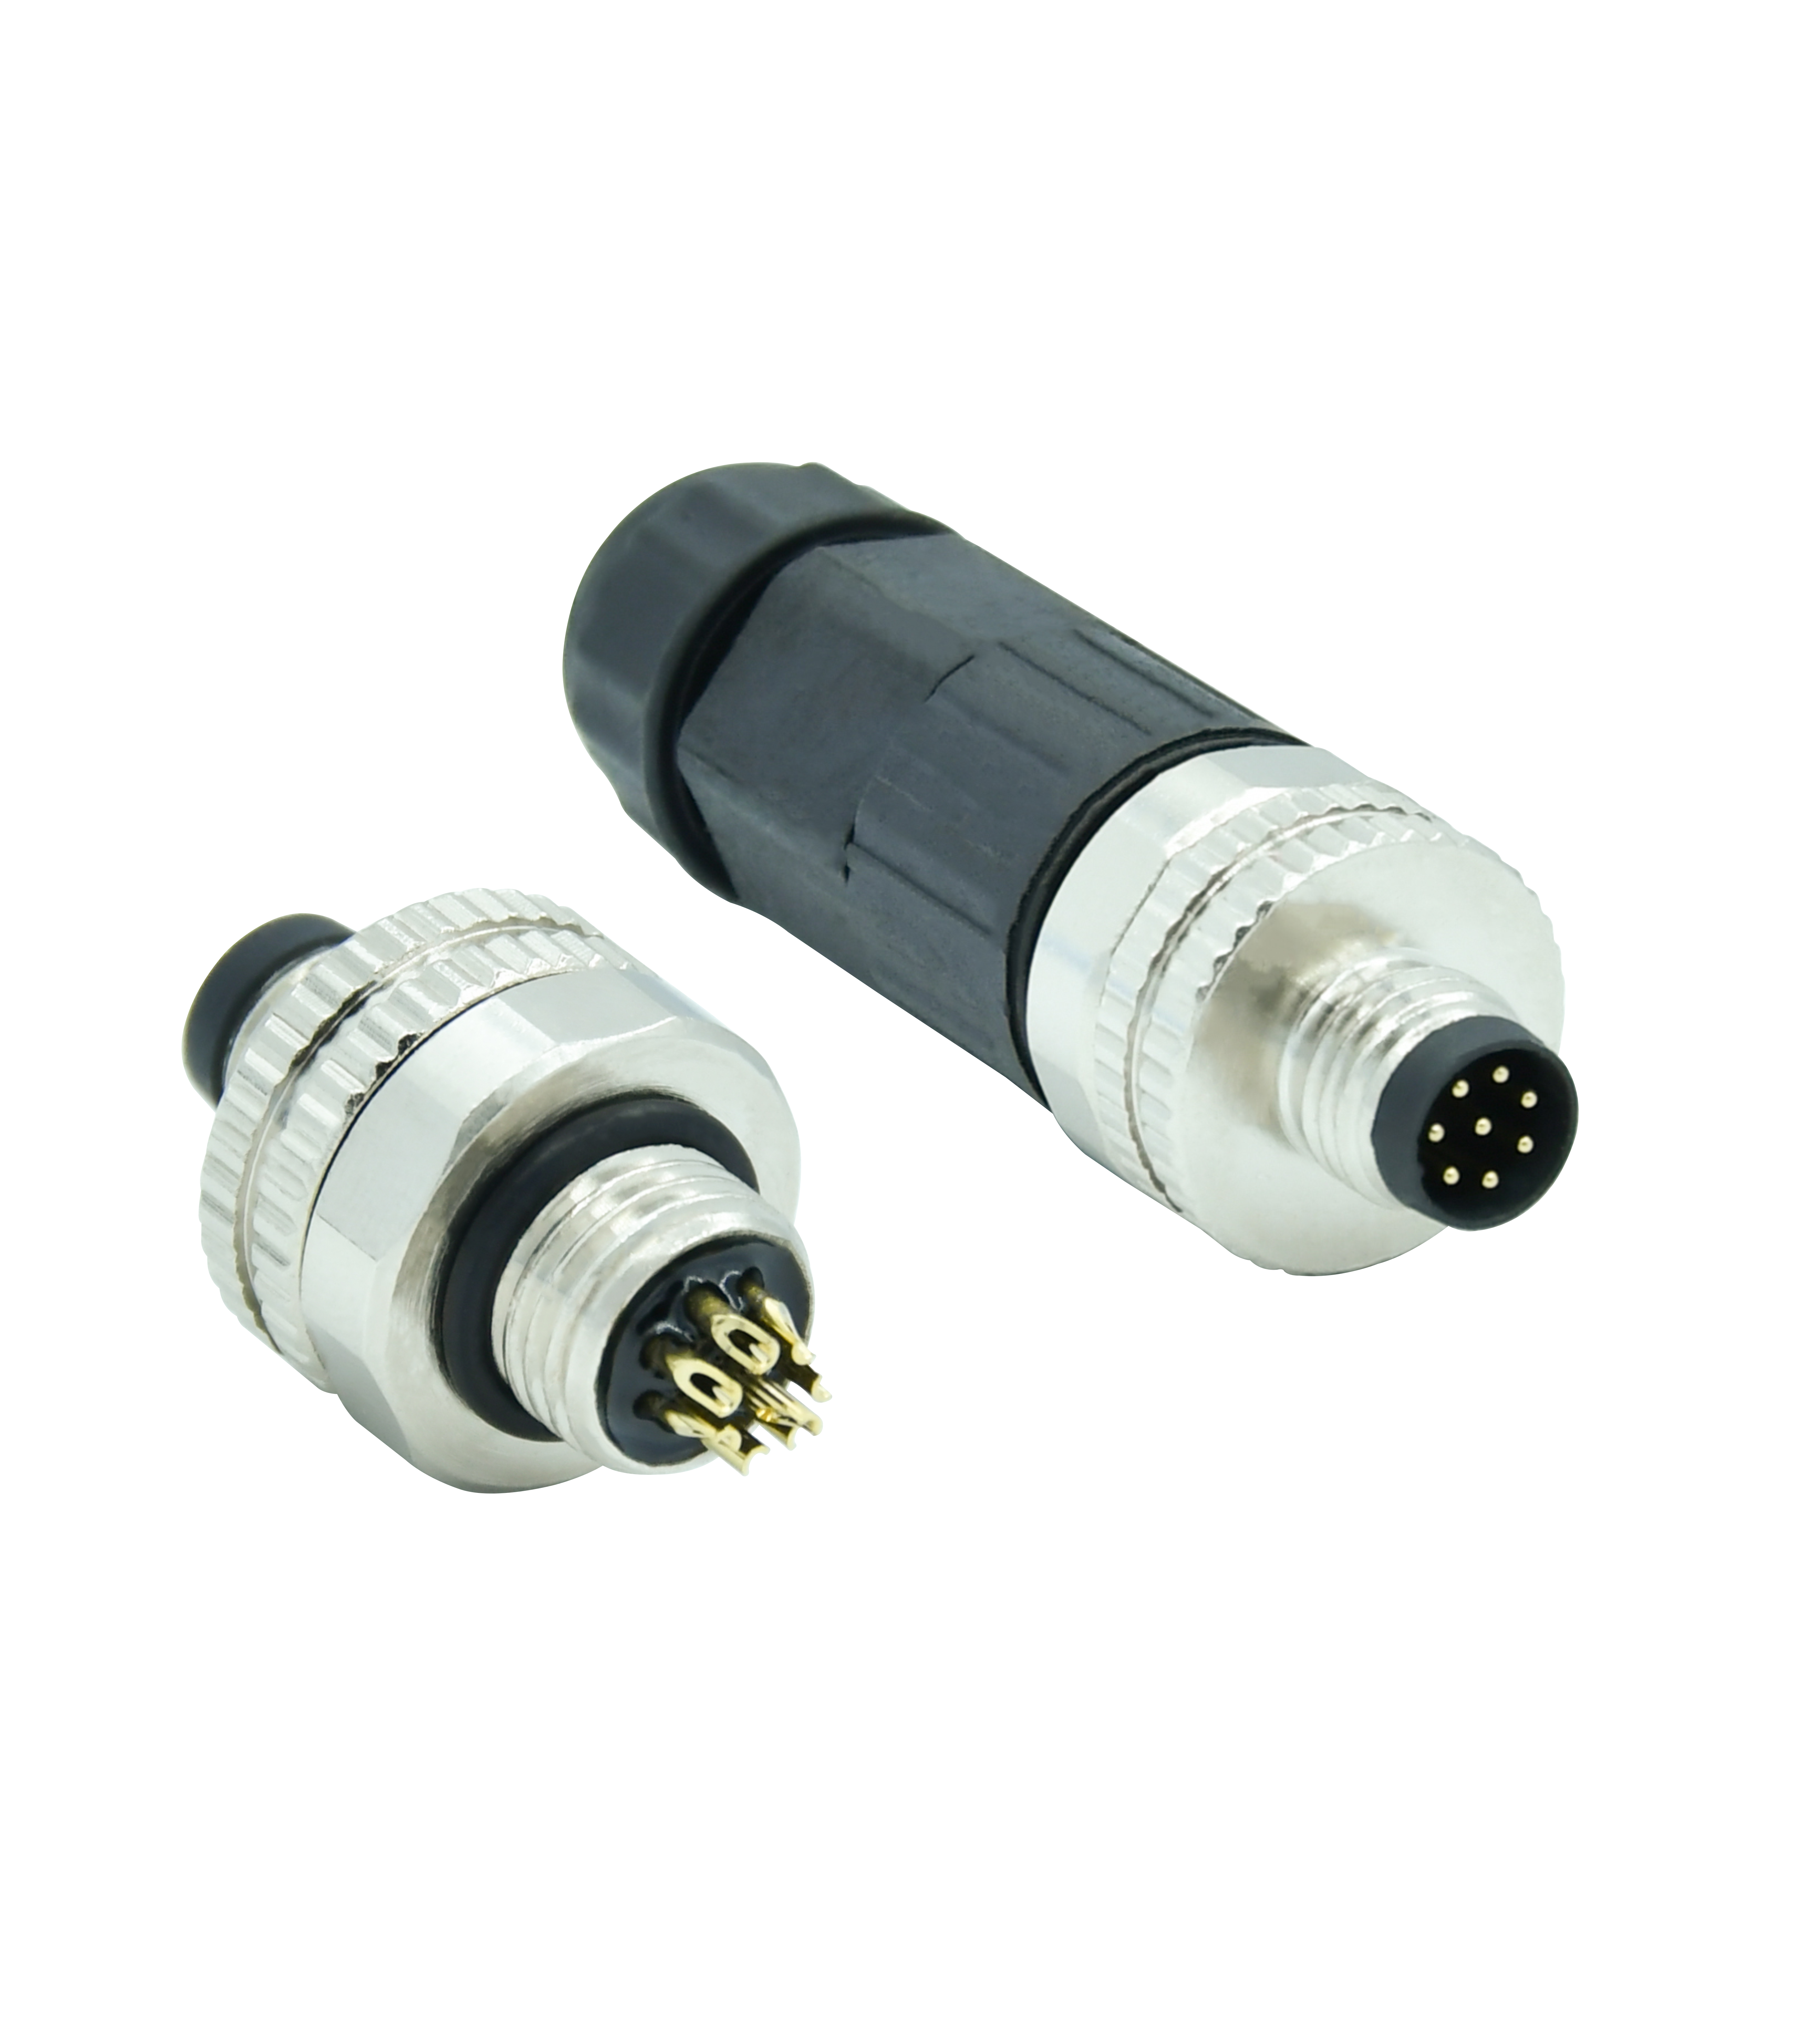 Why Choose Rigoal's M8 Connector for Your Industrial Connectivity Needs?